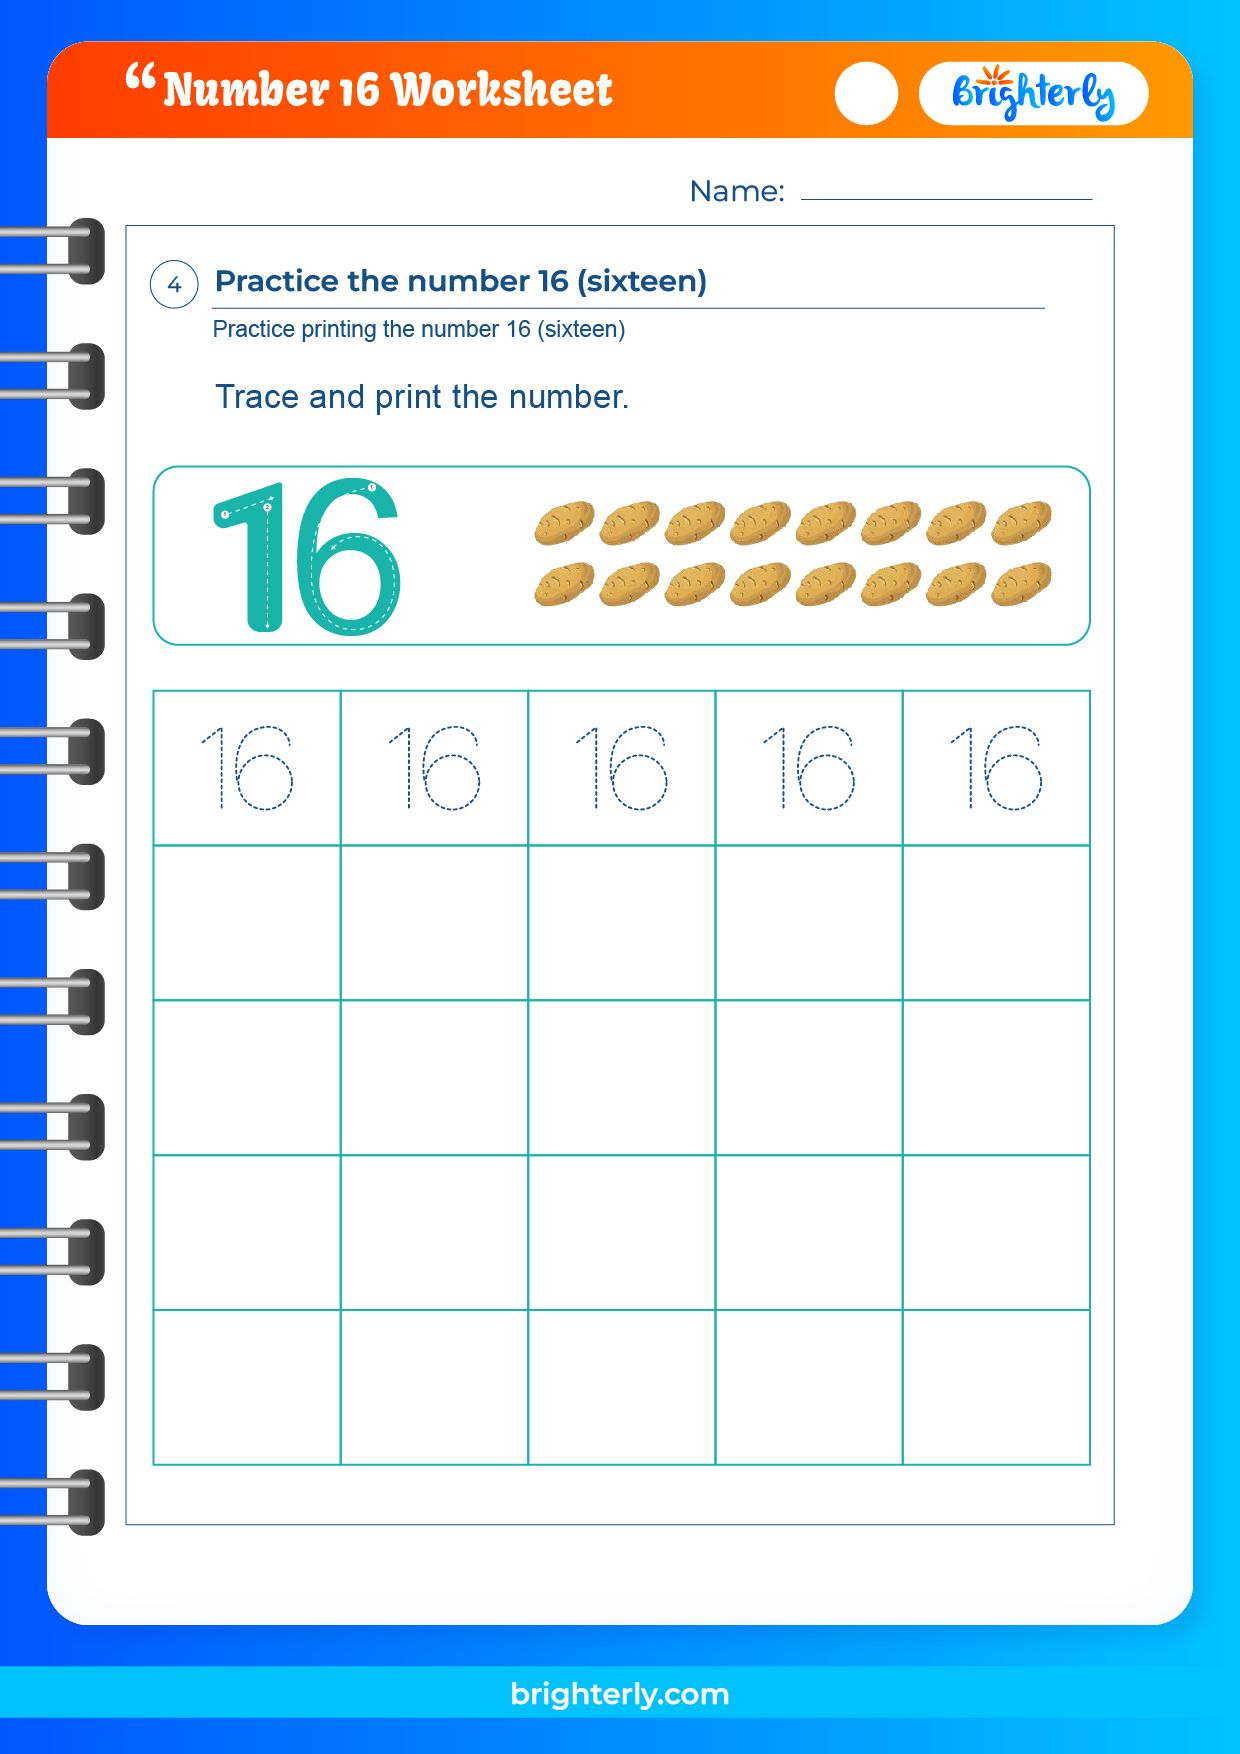 free-printable-number-16-sixteen-worksheets-for-kids-pdfs